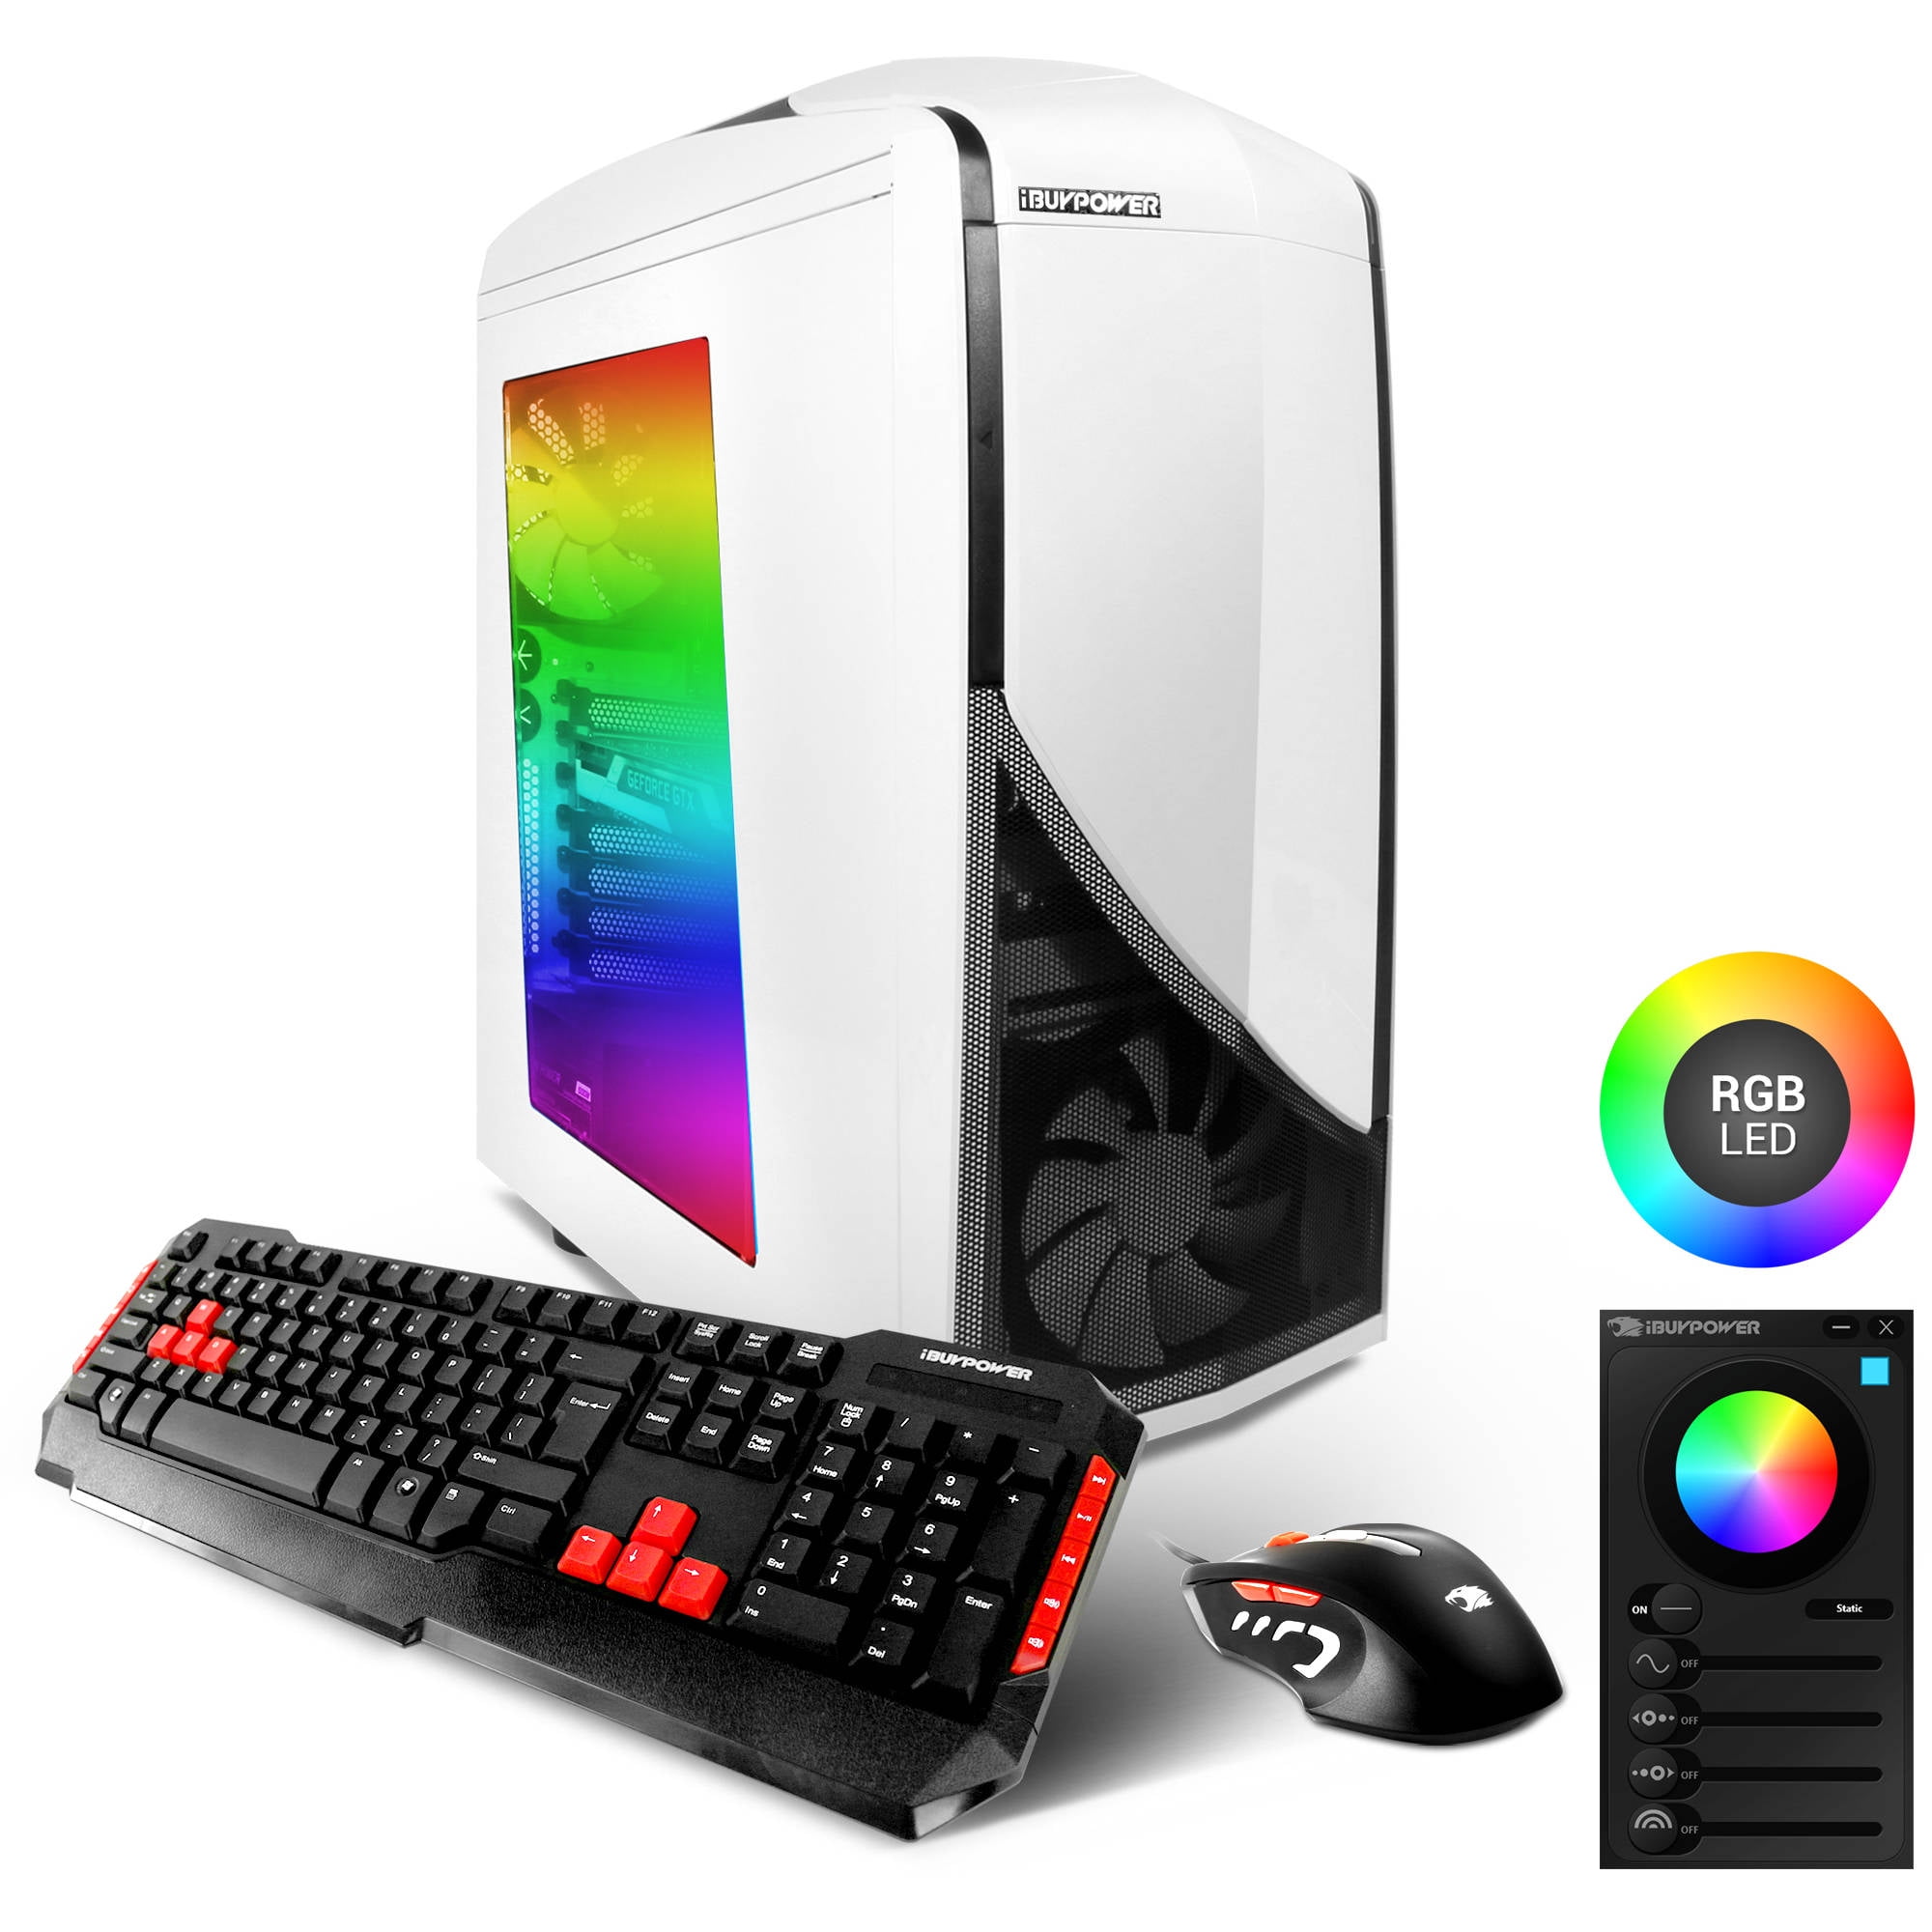 Refurbished Ibuypower Wmo4 Gaming Desktop Pc With Intel Core I7 6700 Processor 8gb Memory 1tb Hard Drive 1gb Solid State Drive And Windows 10 Home Monitor Not Included Walmart Inventory Checker Brickseek